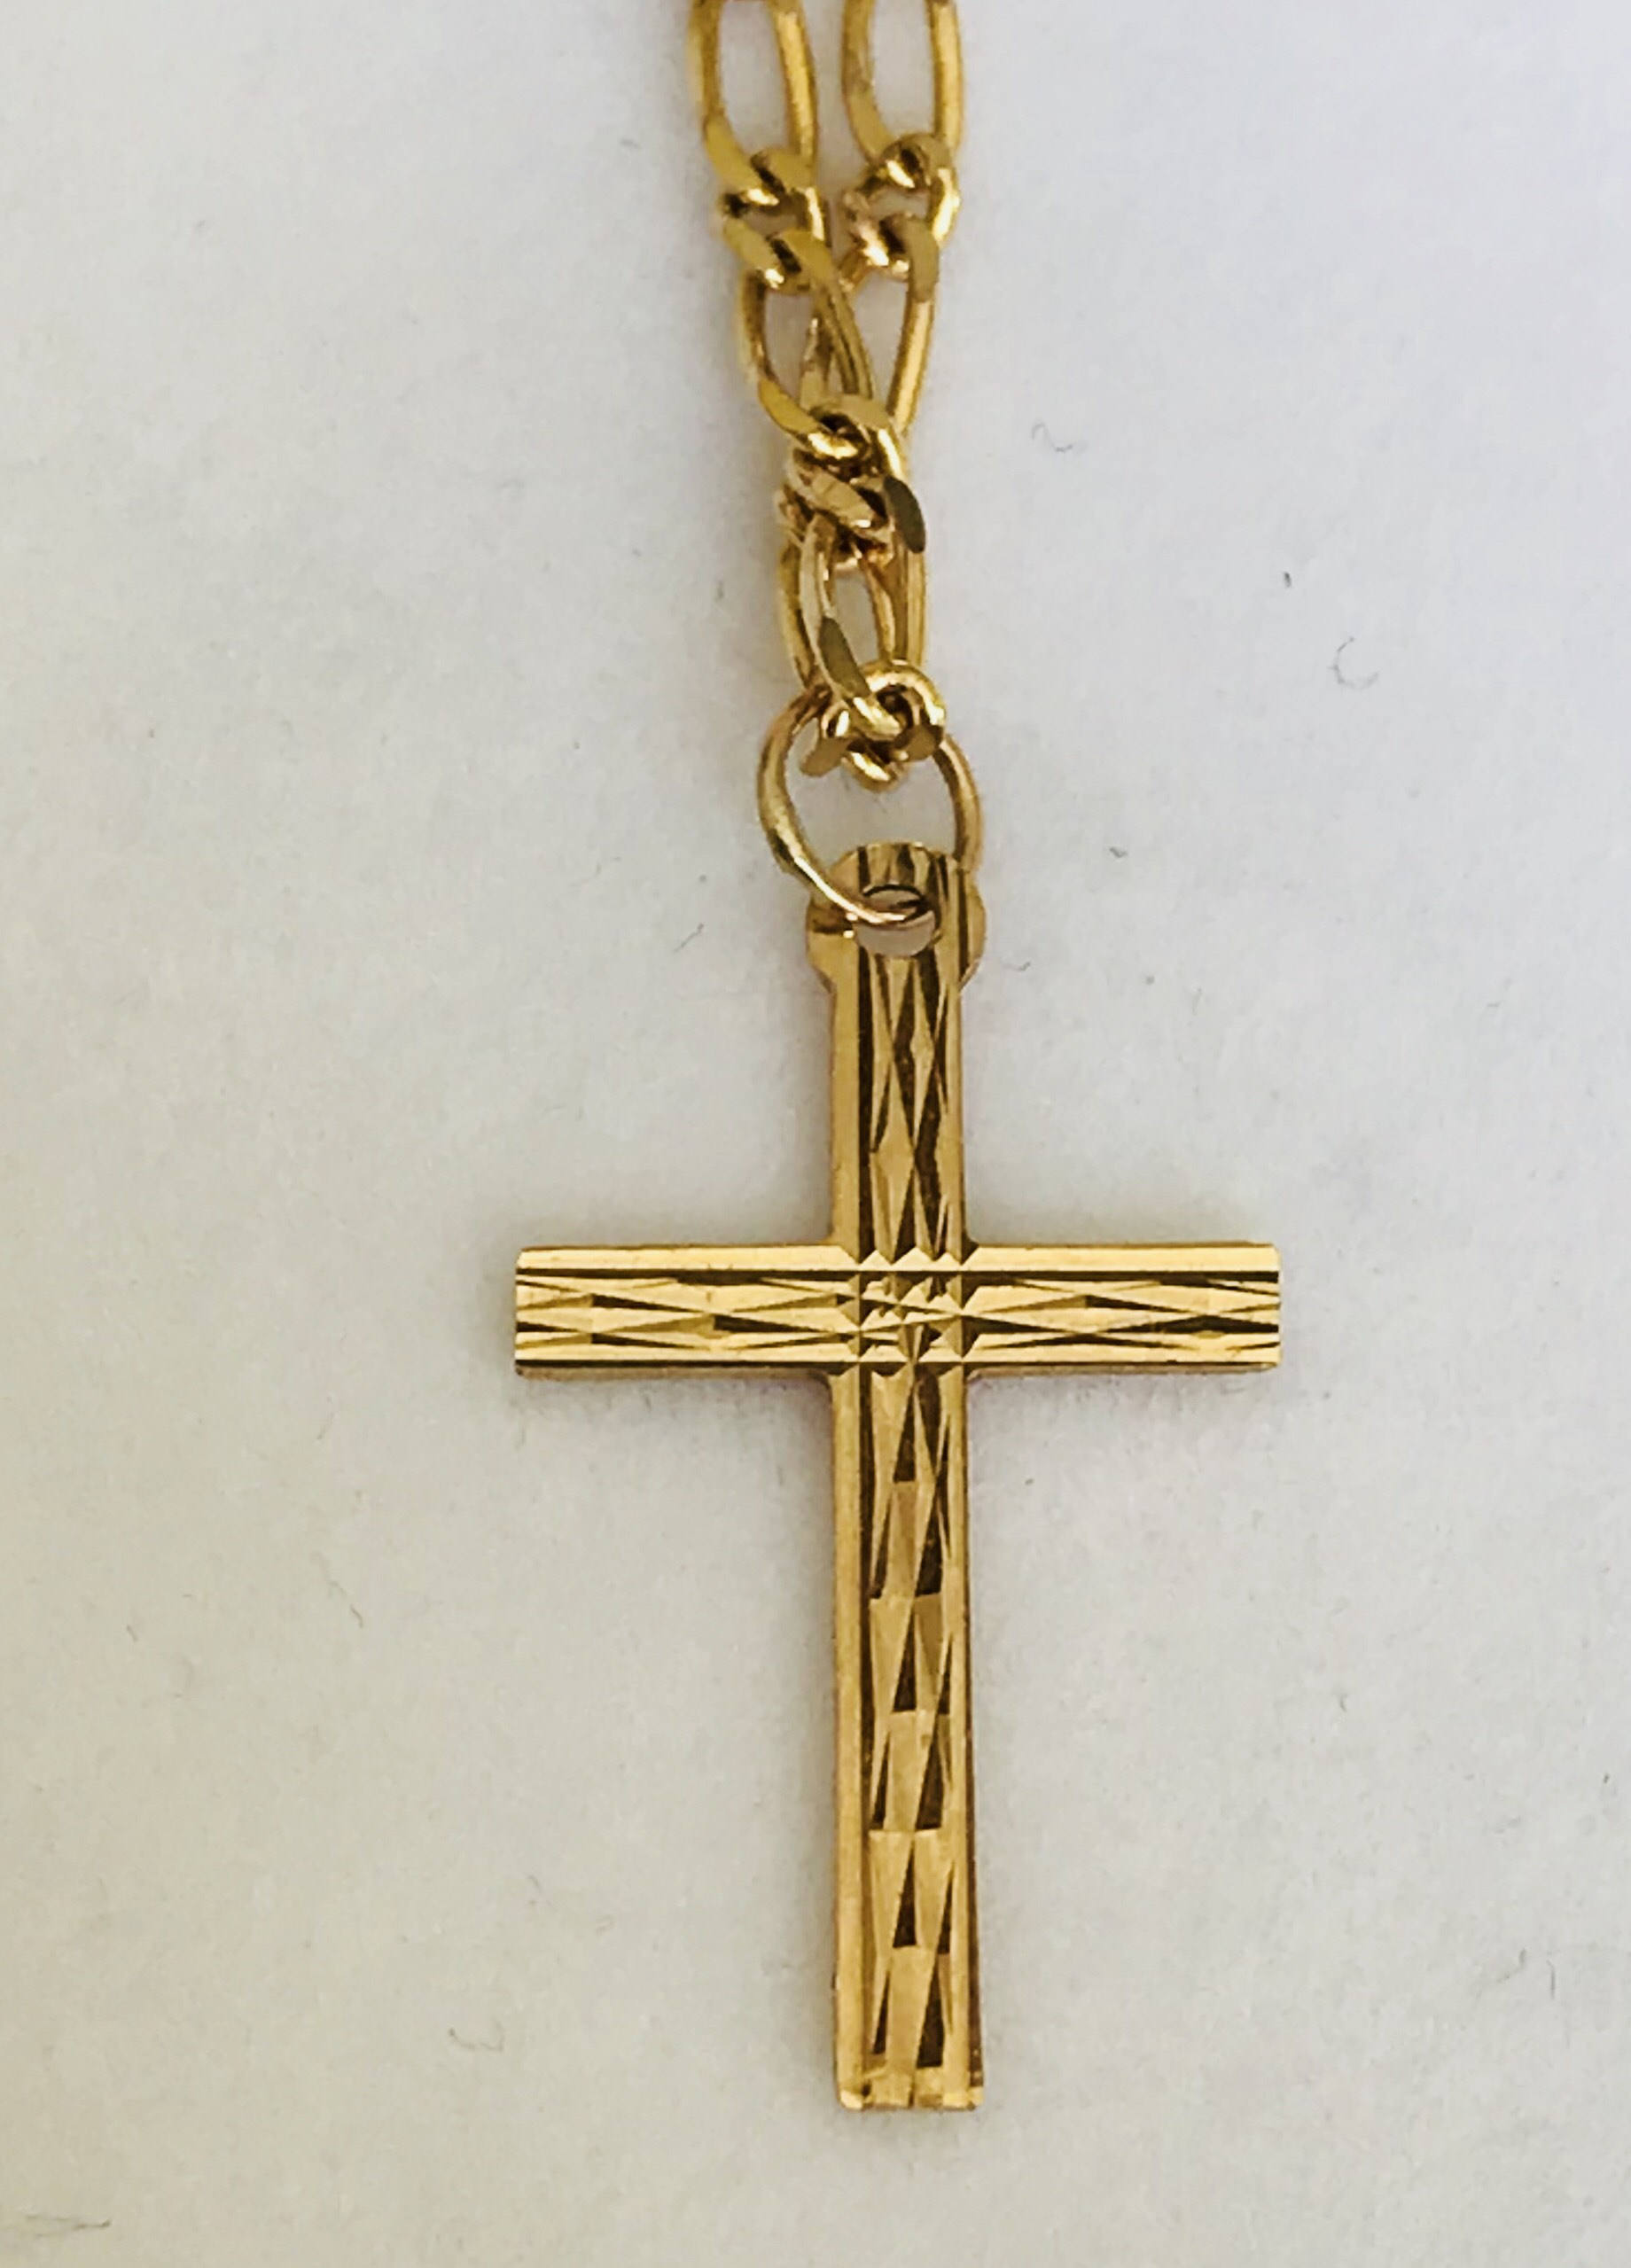 Stunning vintage 9ct yellow gold cross and chain - fully hallmarked